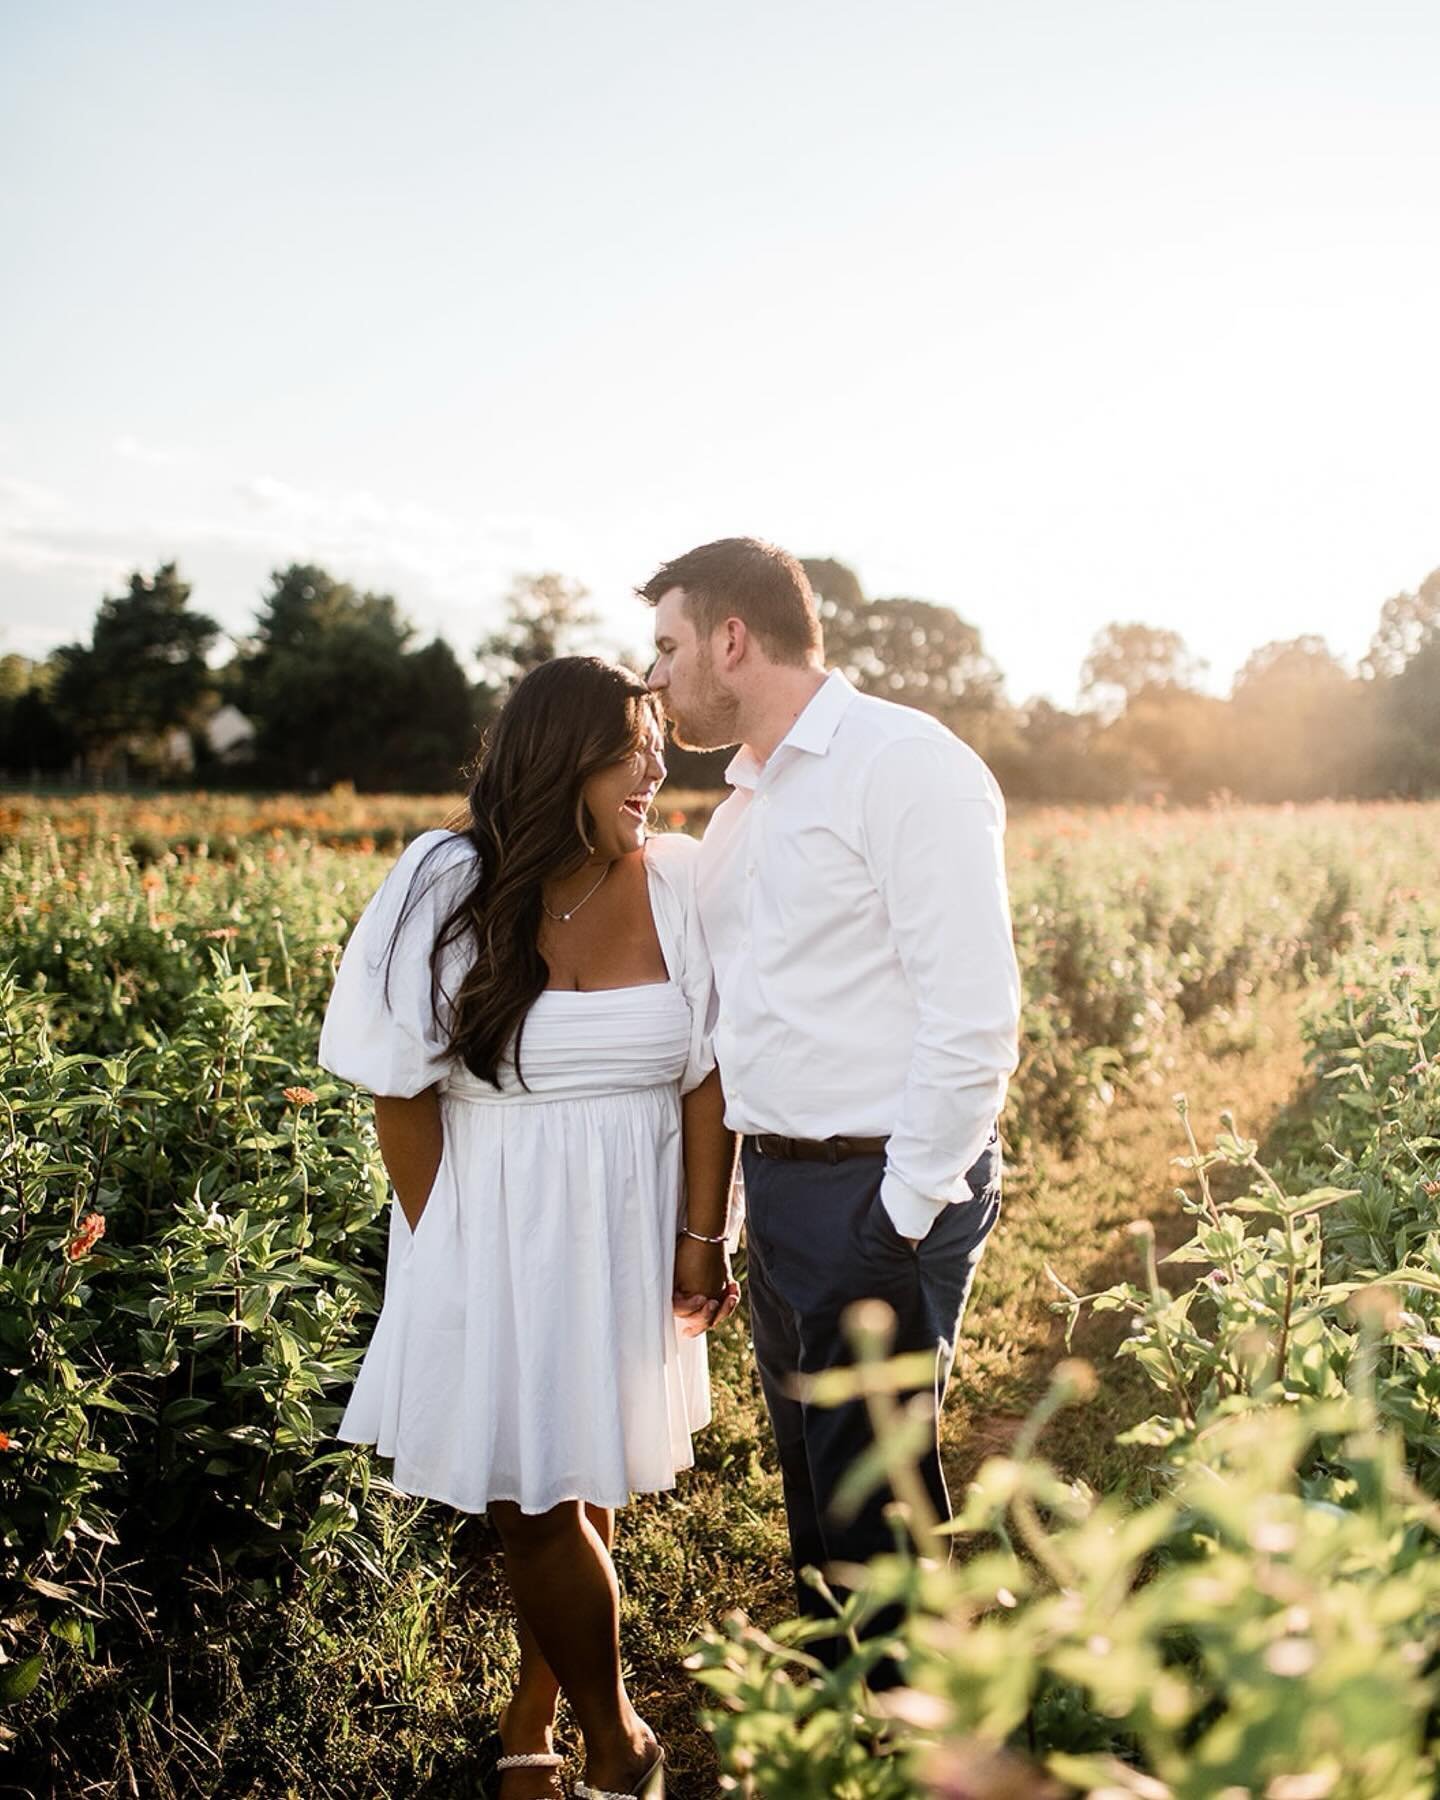 Happy wedding day Rachel &amp; Joseph!! It started out with a fall engagement session in 2022 and now it&rsquo;s your big day. I can&rsquo;t wait to celebrate ya&rsquo;ll on this perfect spring day! See you soon 🫶🏻